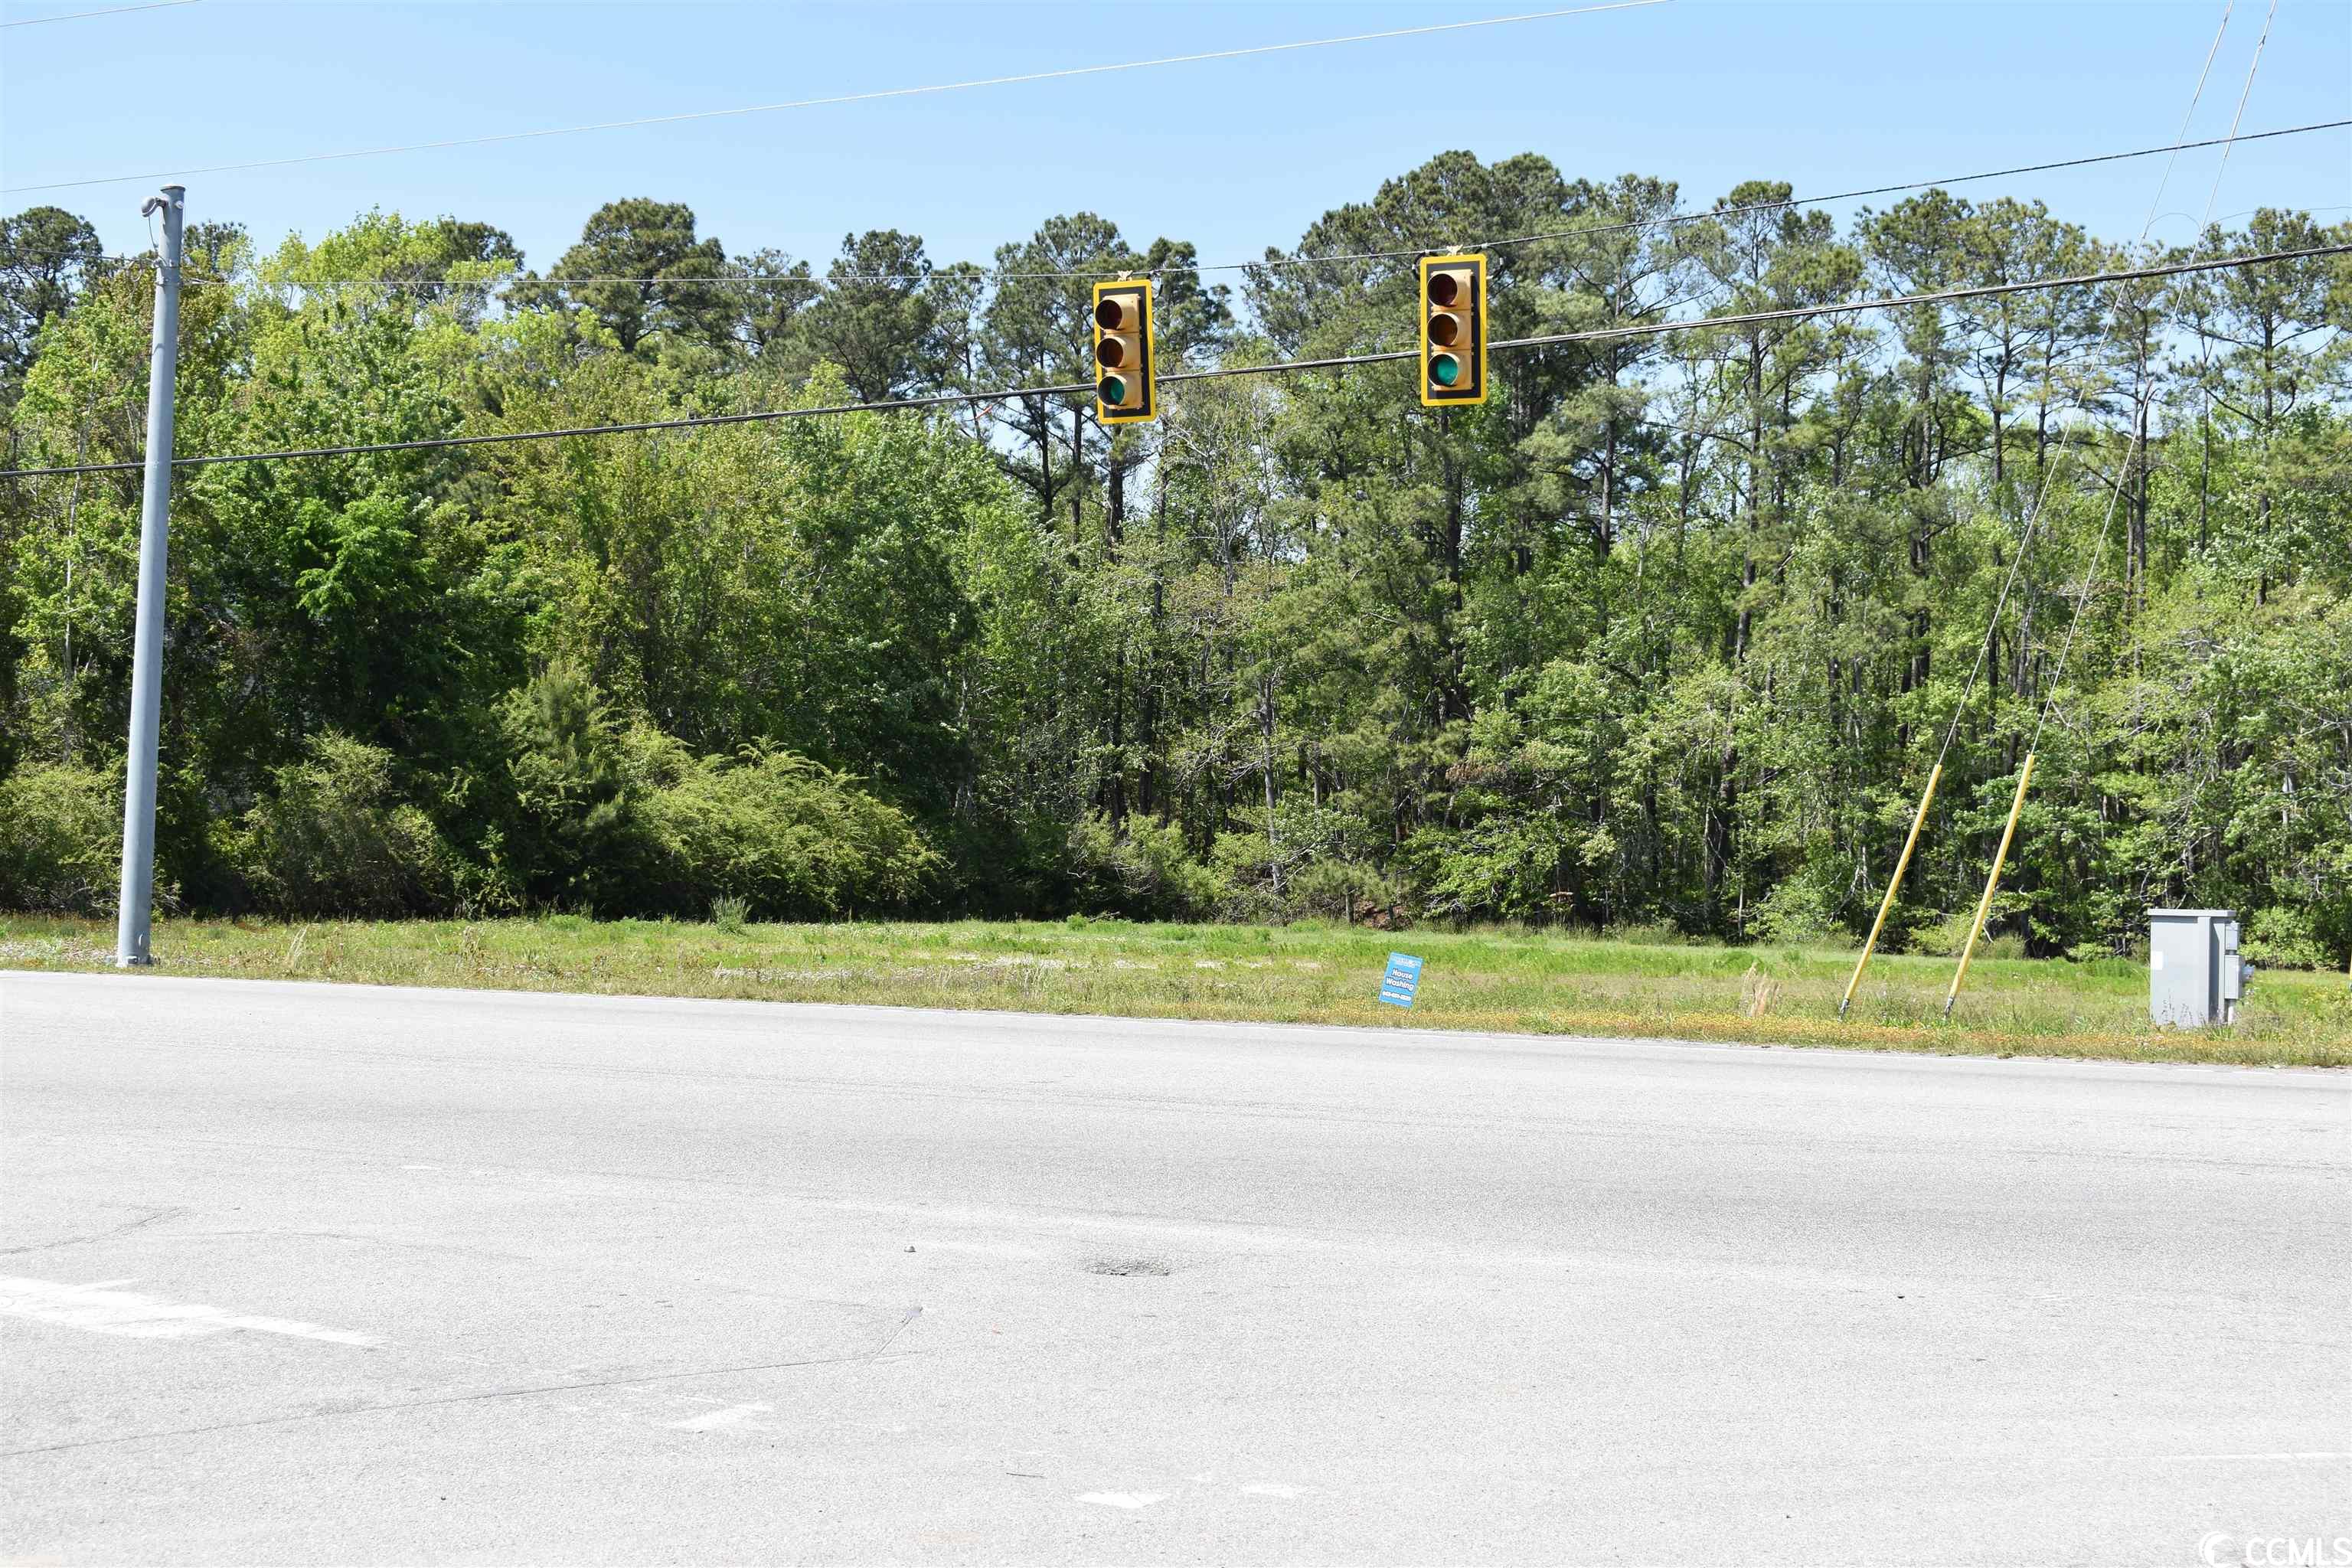 ***578 feet of direct hwy 90 frontage*** located at the intersection of hwy 90 and st. joseph road. little river is a fast growing area and hwy 90 is one of it's busiest roads. easy access to hwy 9, hwy 31, hwy 57, hwy 17, hwy 22 and 5 minutes from the beach. close to north myrtle beach schools. this property is zoned highway commercial (hc) so the possibilities are many. small pond located on the back side of the property would be a great view from the deck of a restaurant/bar or condos. would also make a great location for a gas station, retail store or automotive shop. would make a excellent location for a private school or daycare. if it is a high traffic location is what your business plans call for then this lot is for you. check it out before it is gone.